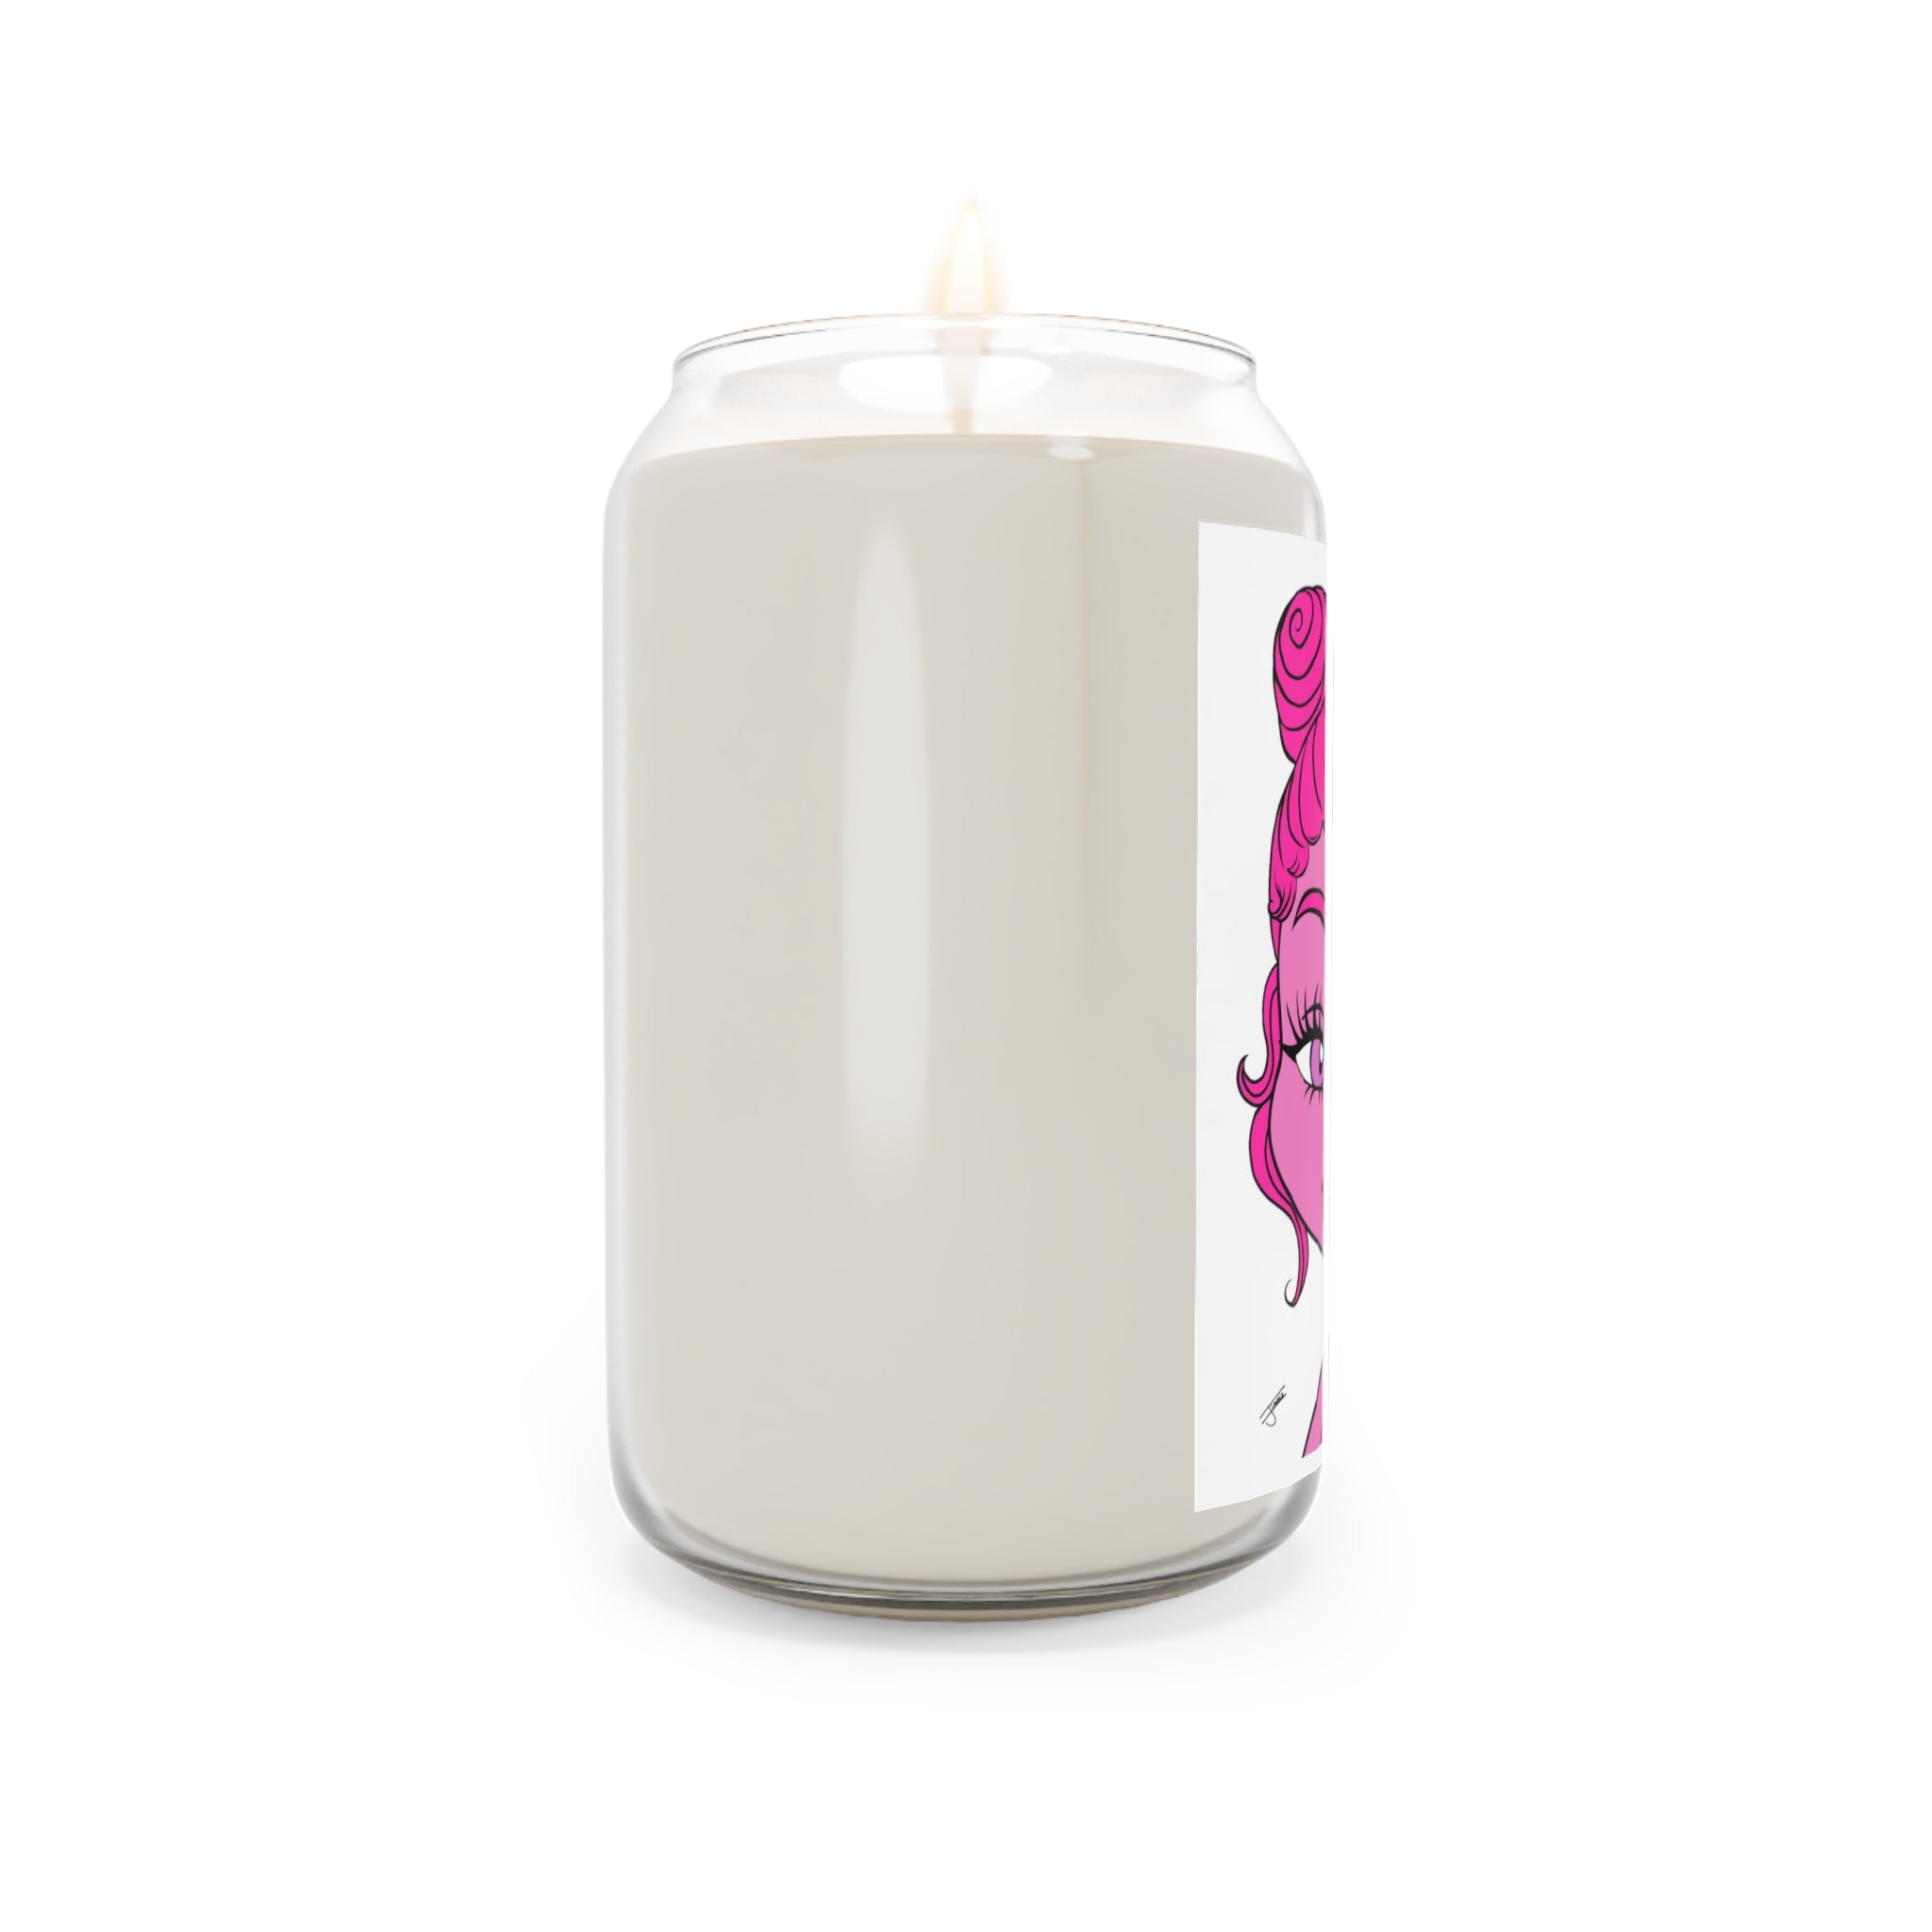 Miss Taurus Scented Candle LARGE